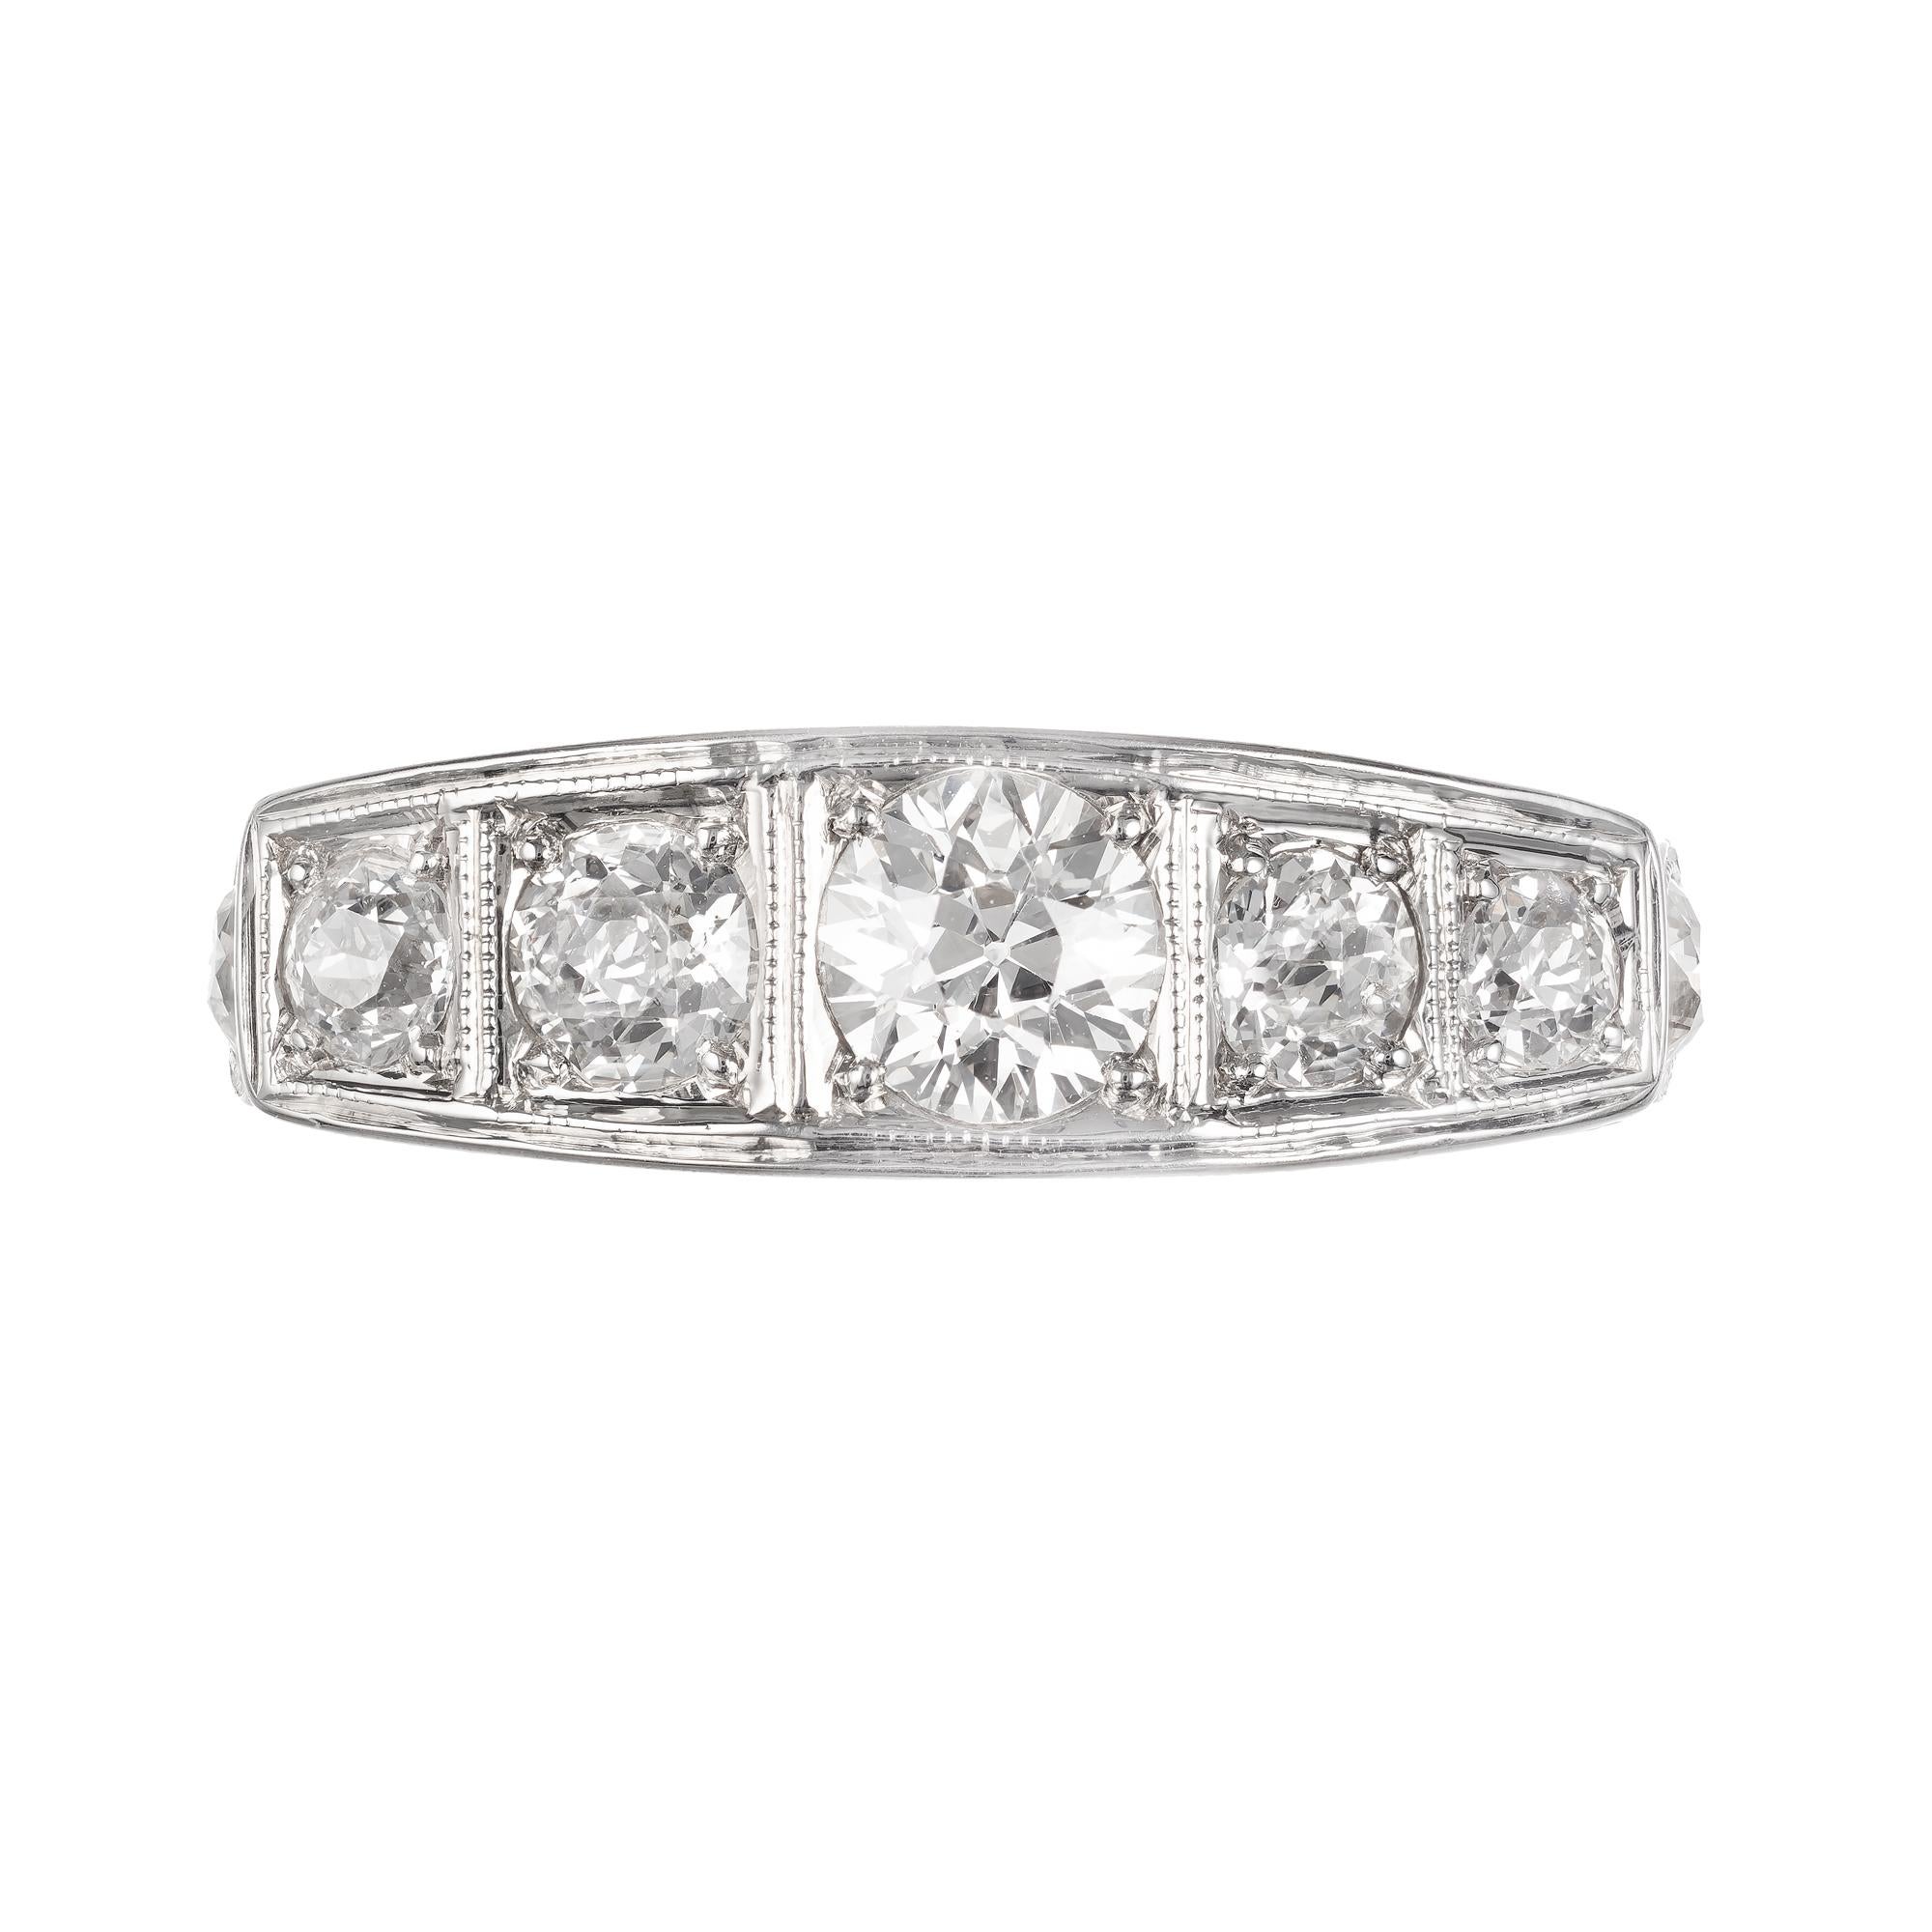 Seven Bright sparkly old European cut diamond ring. In a hand pierced and beaded 18k white gold setting. 

1 old European cut G-H SI2 diamond, Approximate .50ct EGL Certificate # US400124772D
6 old European cut H-I SI2 diamonds, Approximate